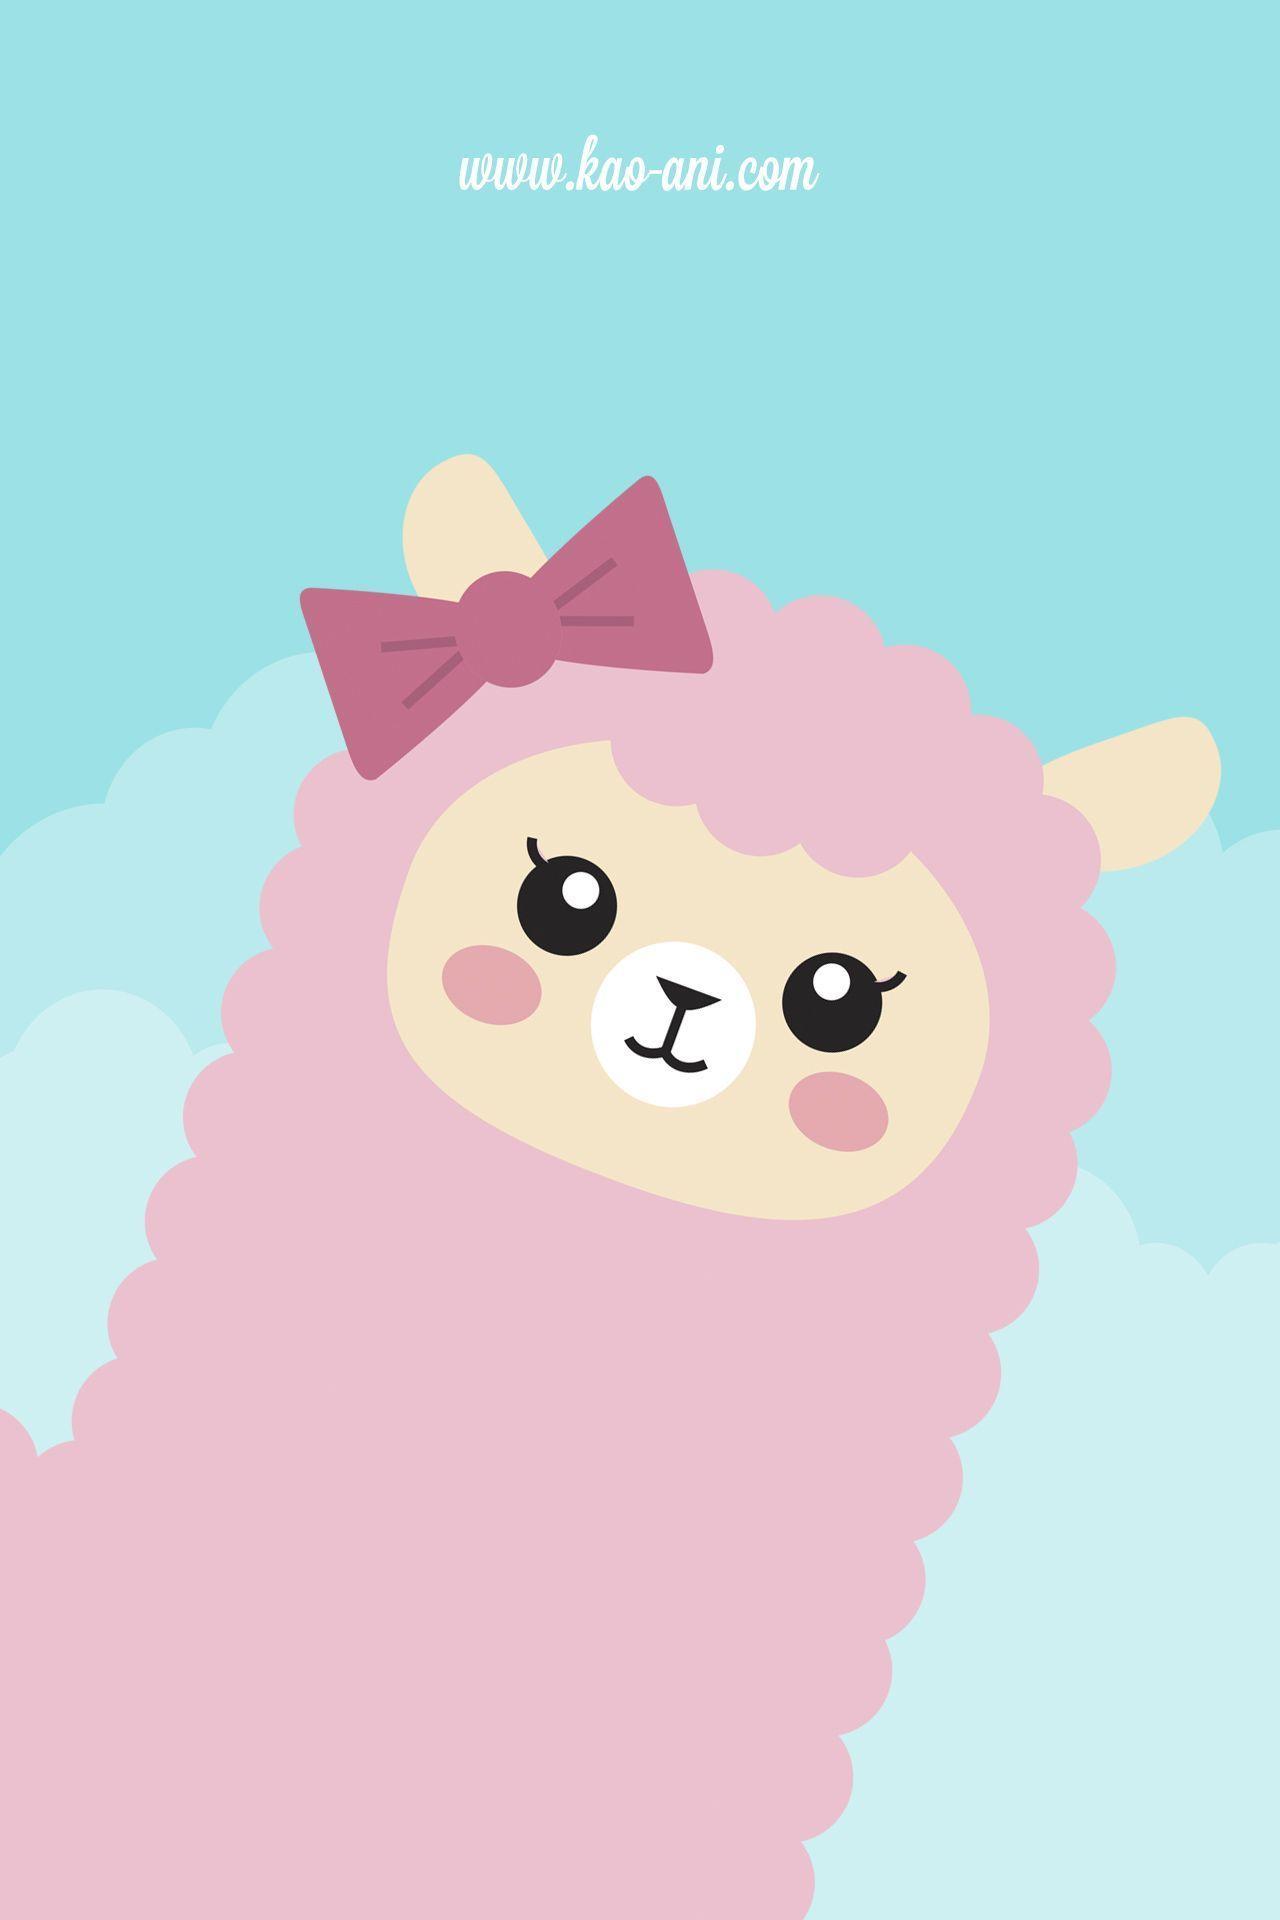 Cute Llama Wallpapers  Free download and software reviews  CNET Download